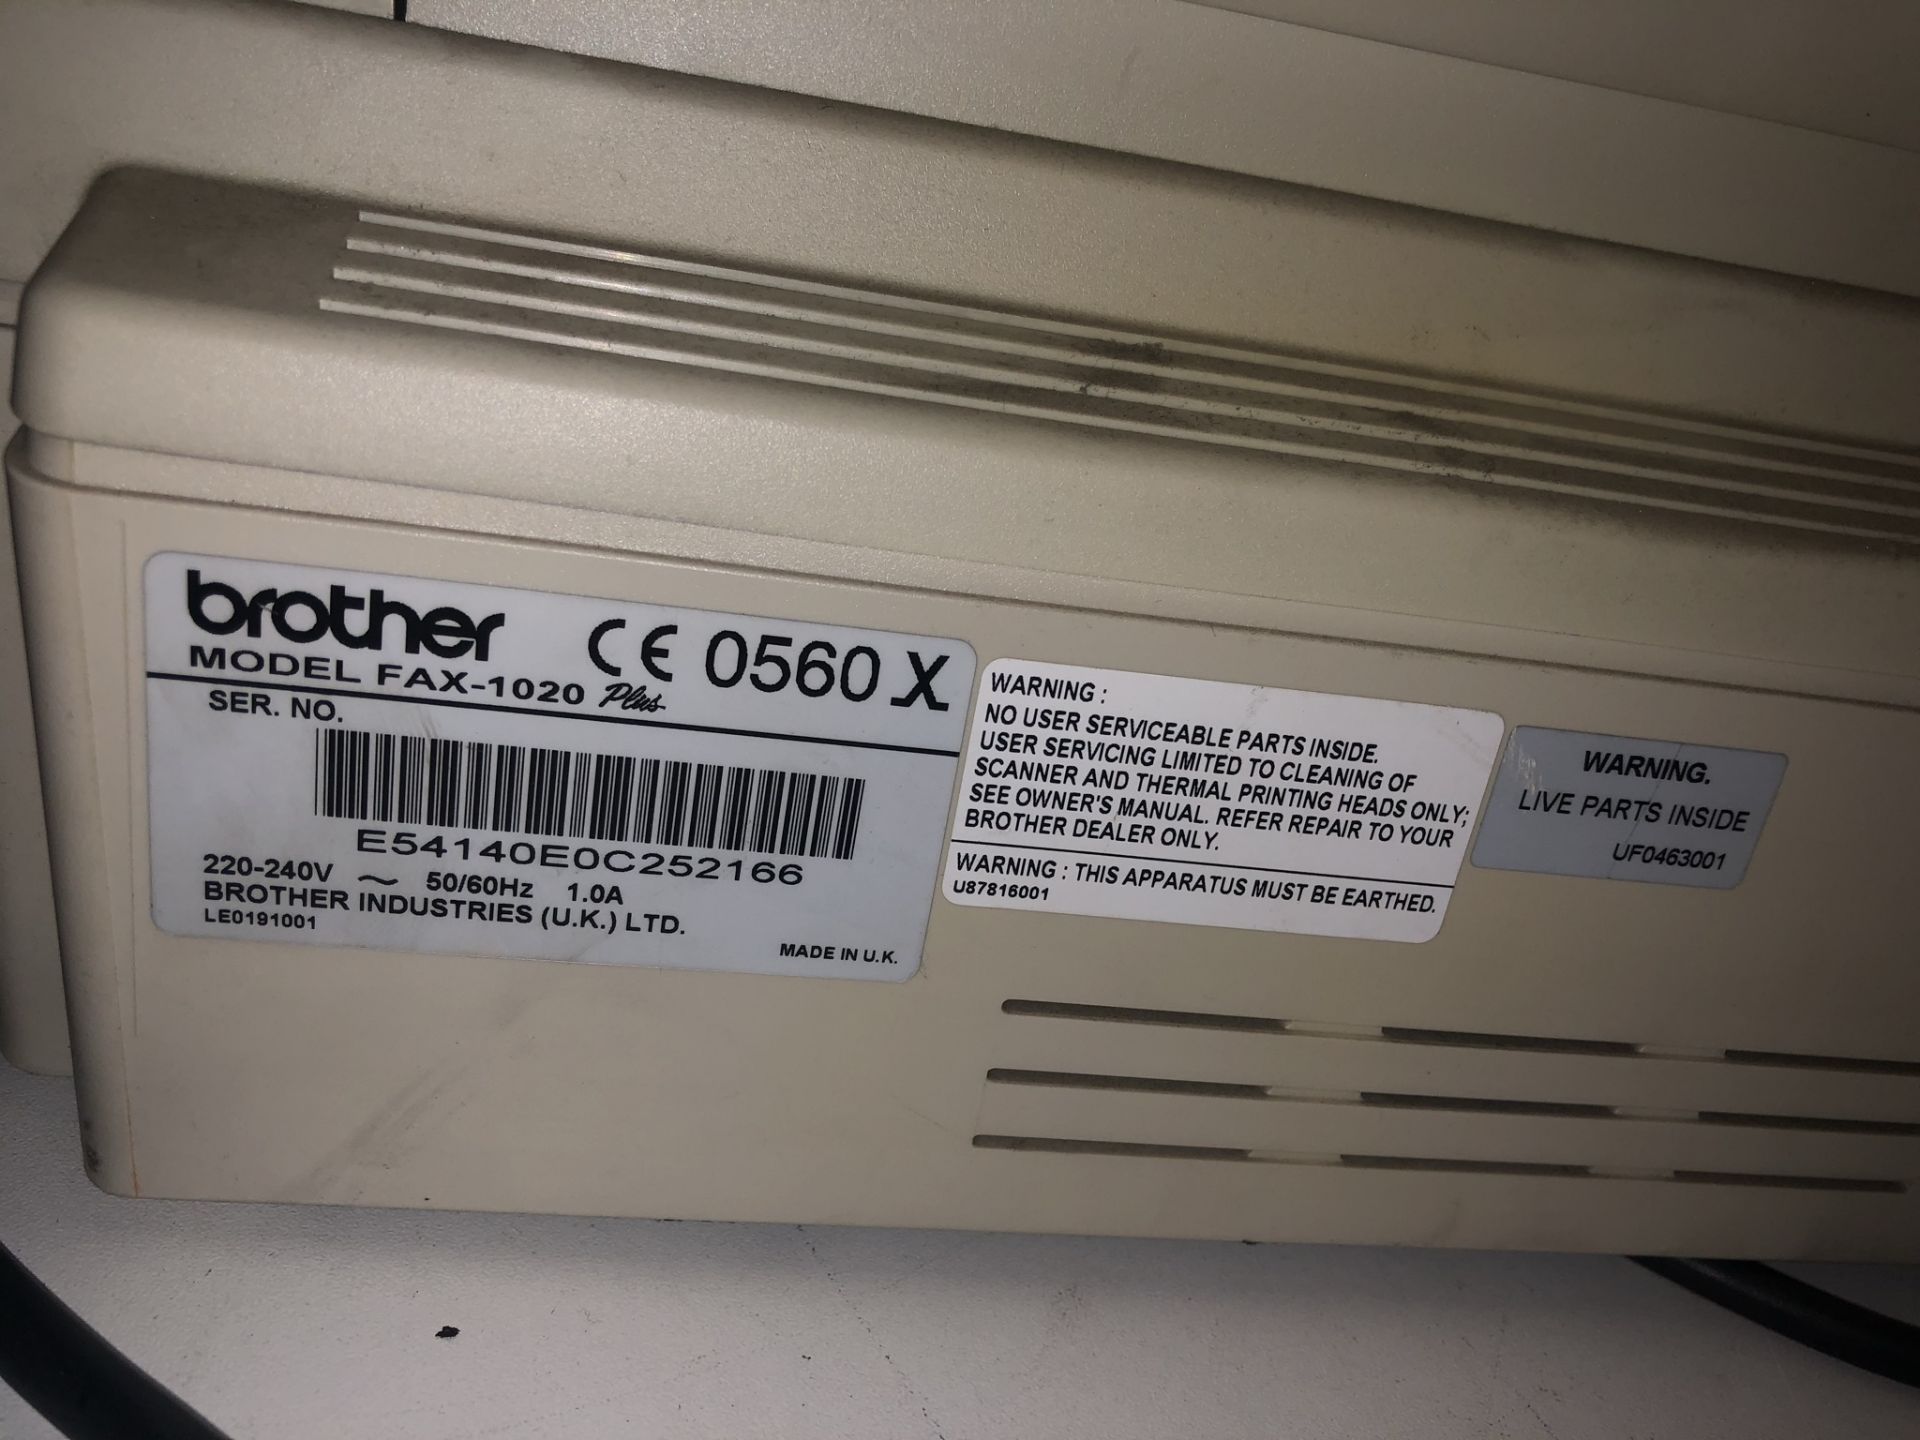 Brother FAX-1020 Plus Fax Machine - Image 3 of 3